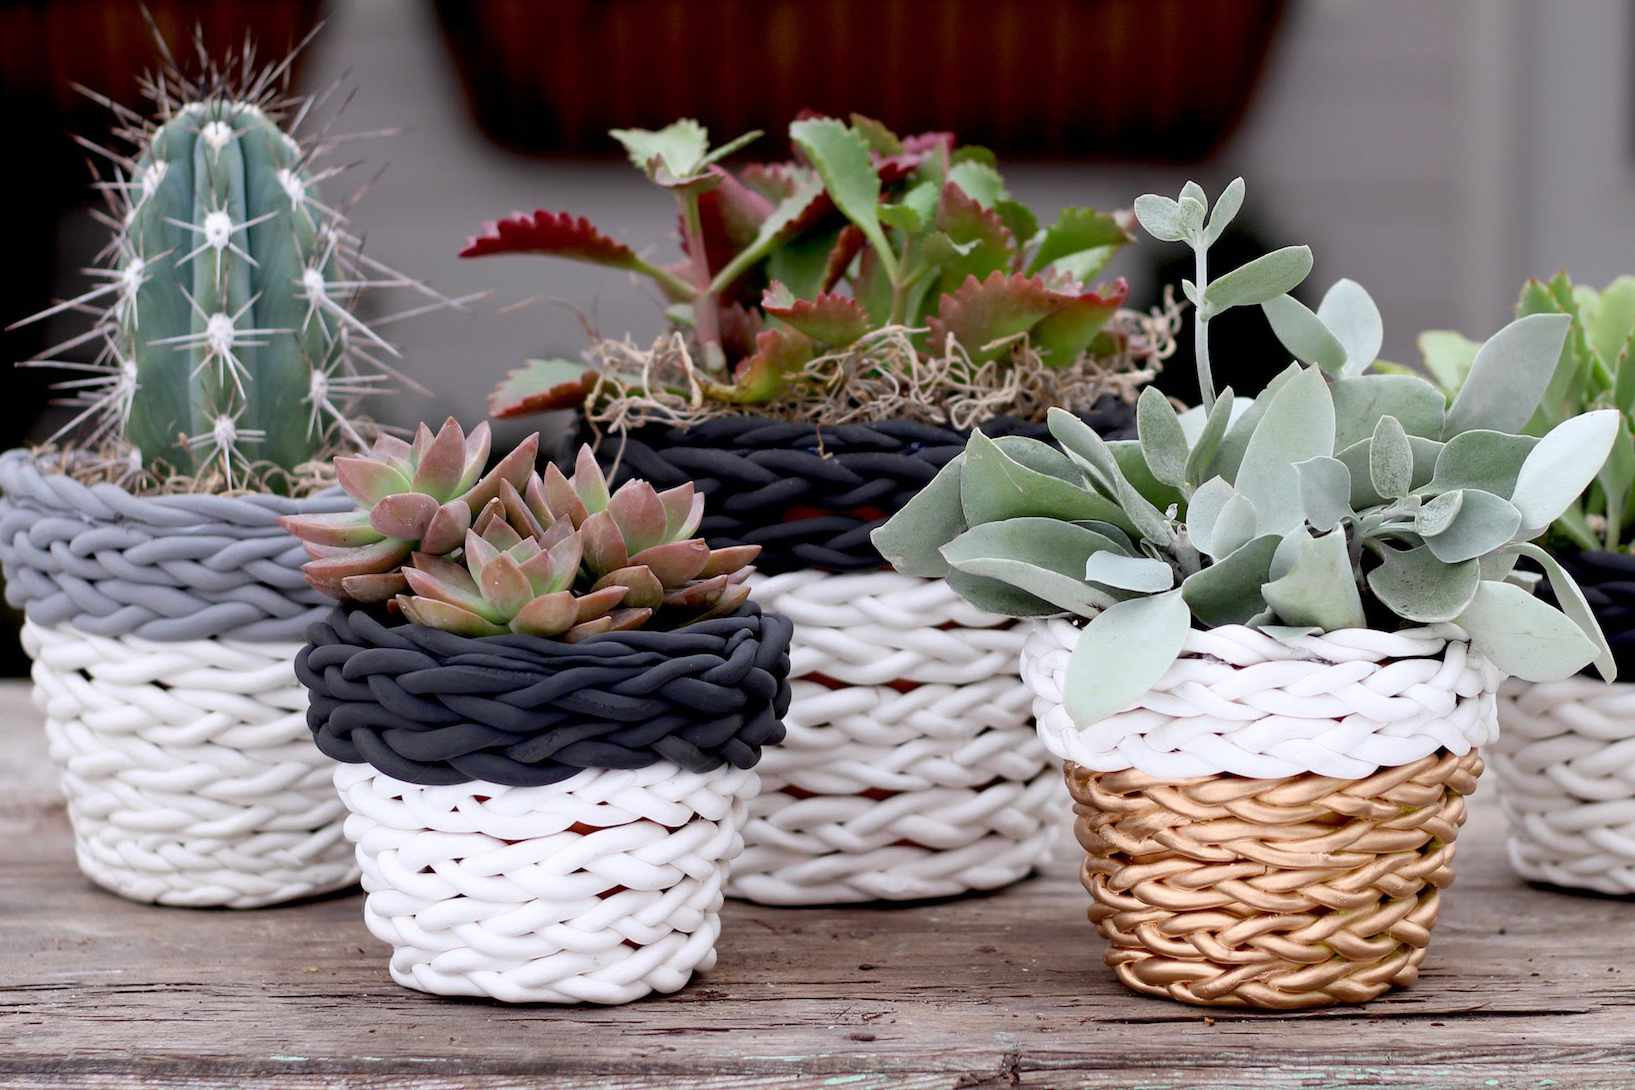 Small Terra Cotta Vases Of 30 Great Tiny Planters You Can Make Yourself Intended for 2 Diy Clay Braided Planters 58c981005f9b581d72c454bc